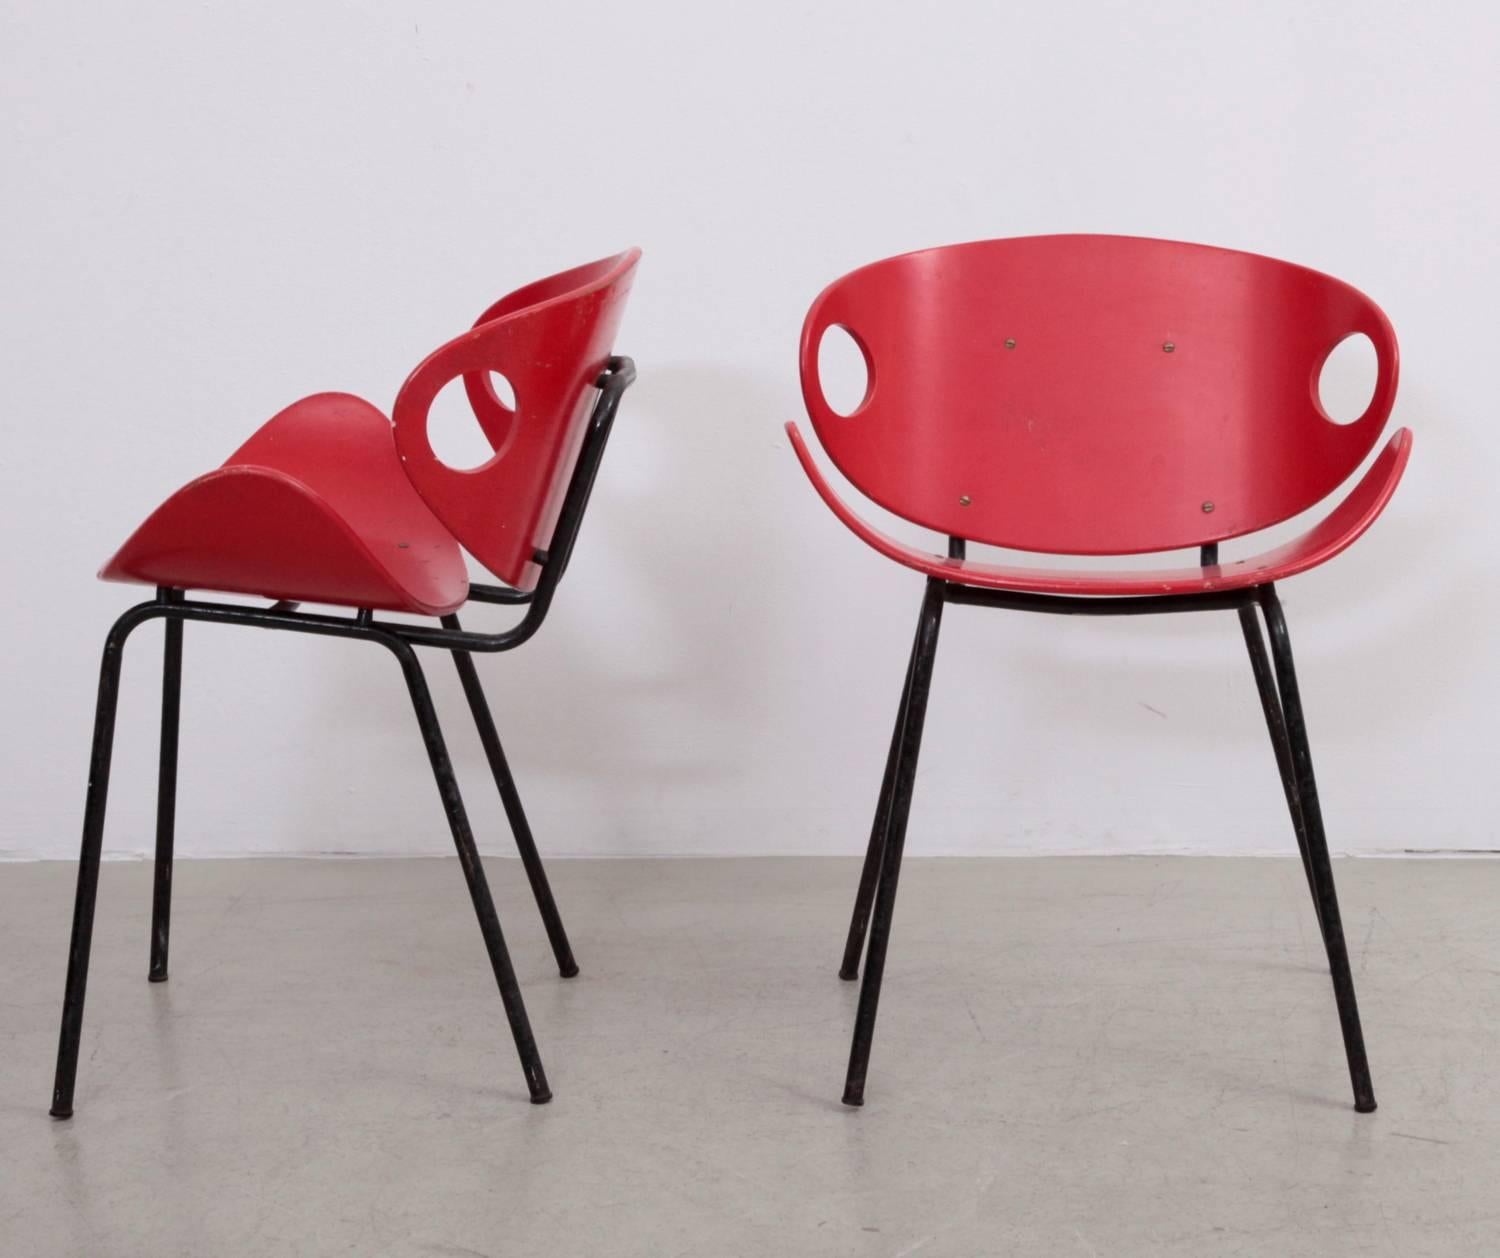 Rare pair of 1950s chairs by Olof Kettunen for Merivaara, Finland. The chairs are made of four black metal legs and a curved plywood seat and back. The chairs in original red color are really rare. A simple and elegant design, labelled by J.